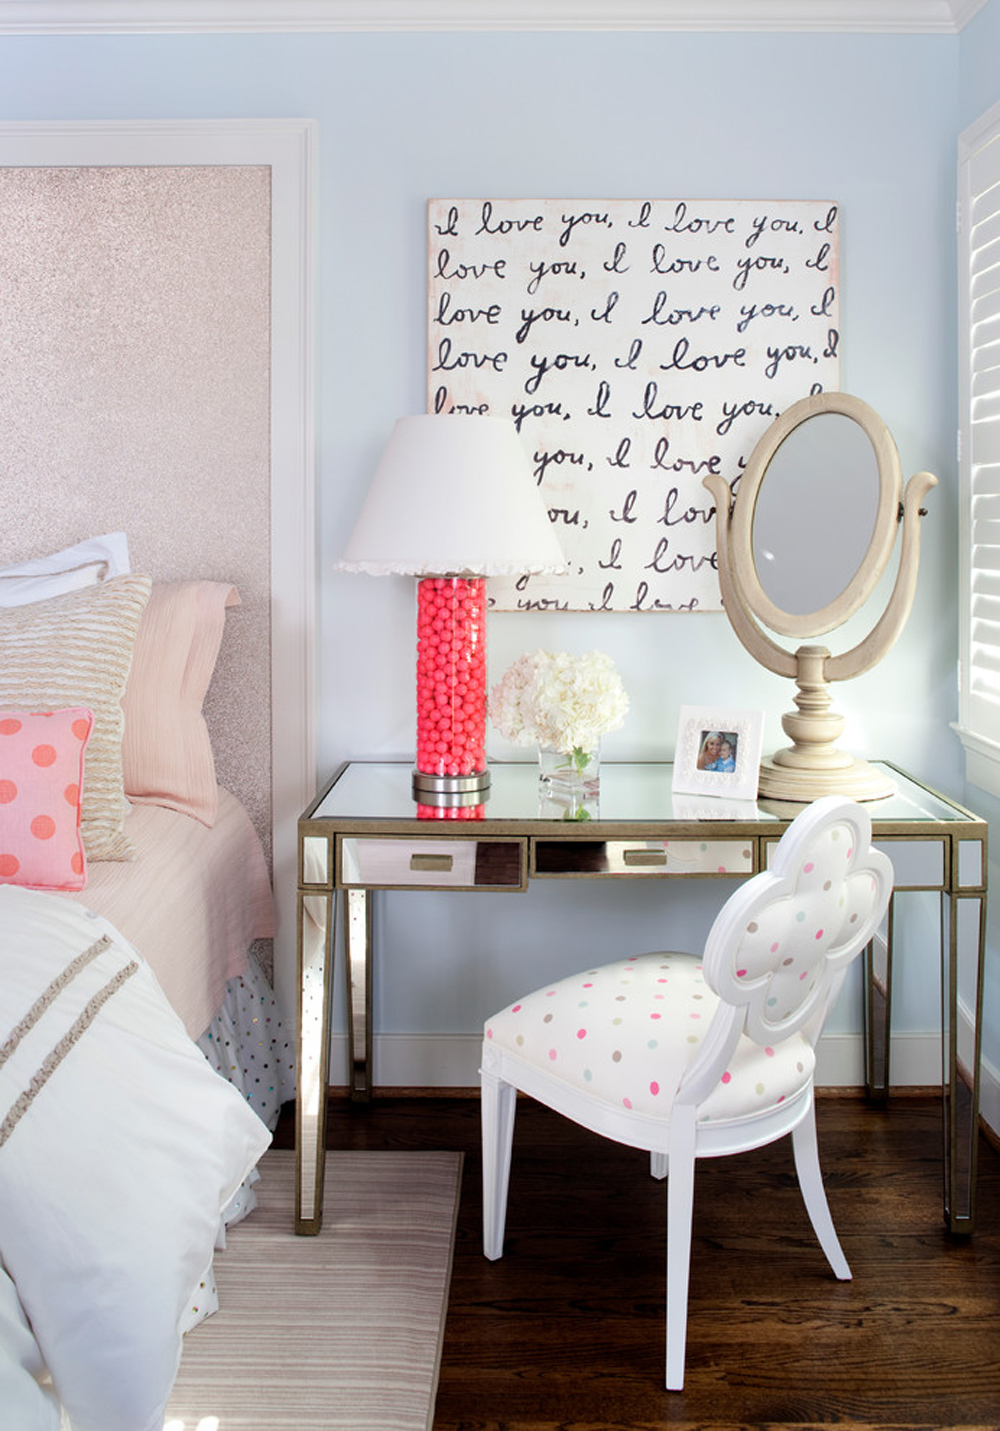 Eclectic-Bedroom-by-Kristin-Peake-Interiors Bedroom Paint Ideas You Should See Before Doing A Paint Job